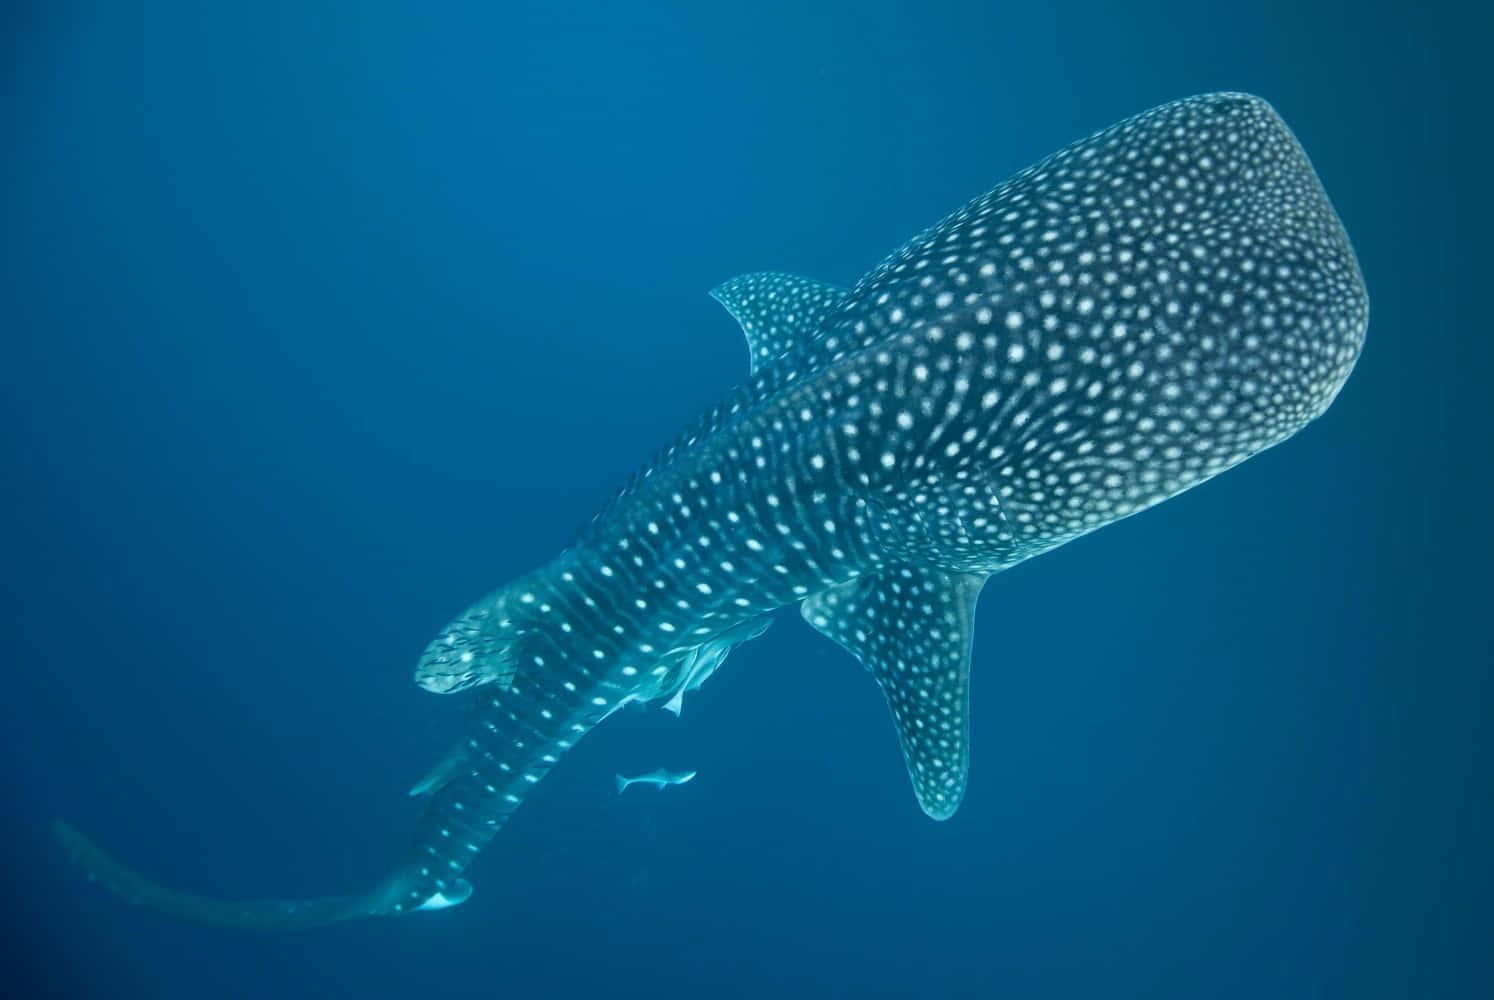 Get close to nature and its majestic creatures with a glimpse of a whale shark.